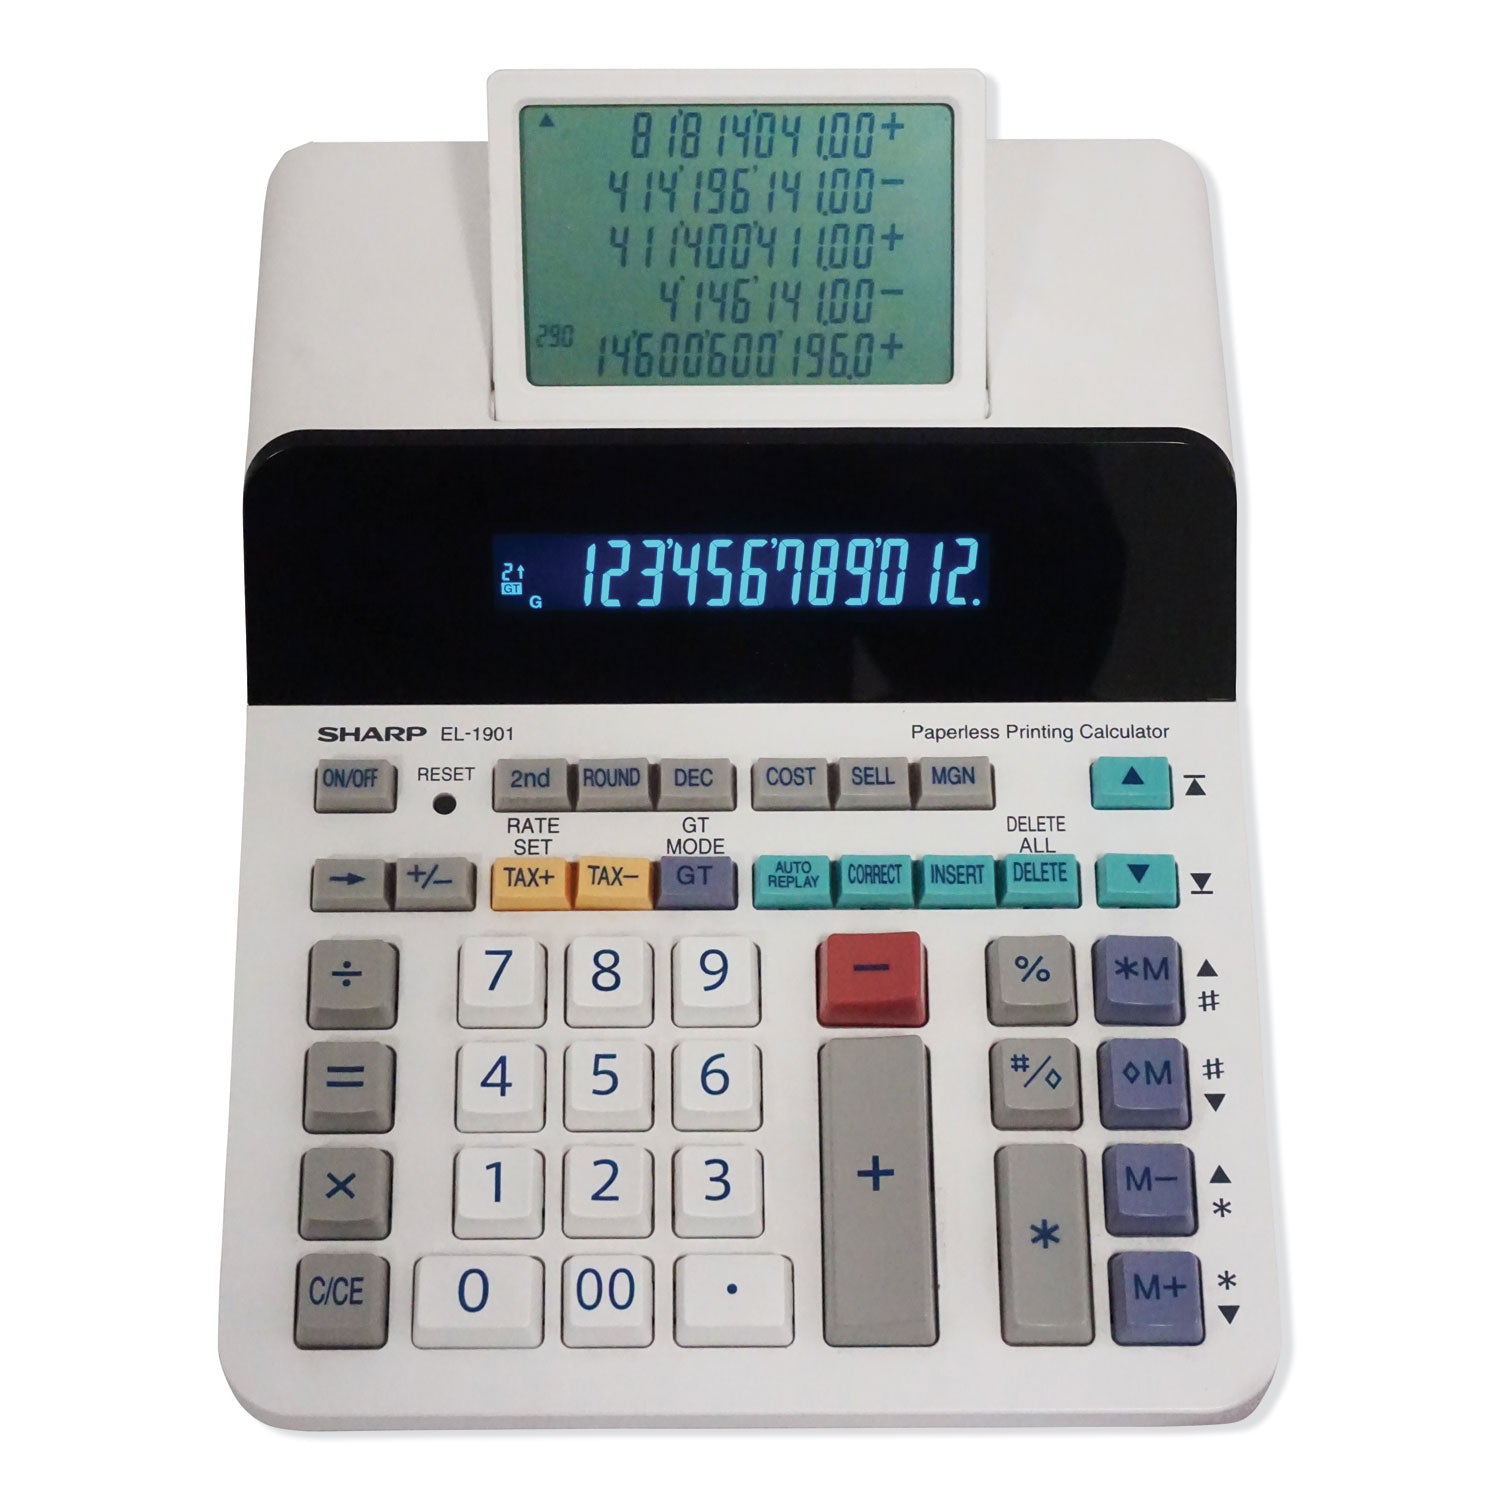 el-1901-paperless-printing-calculator-with-check-and-correct_shrel1901 - 3